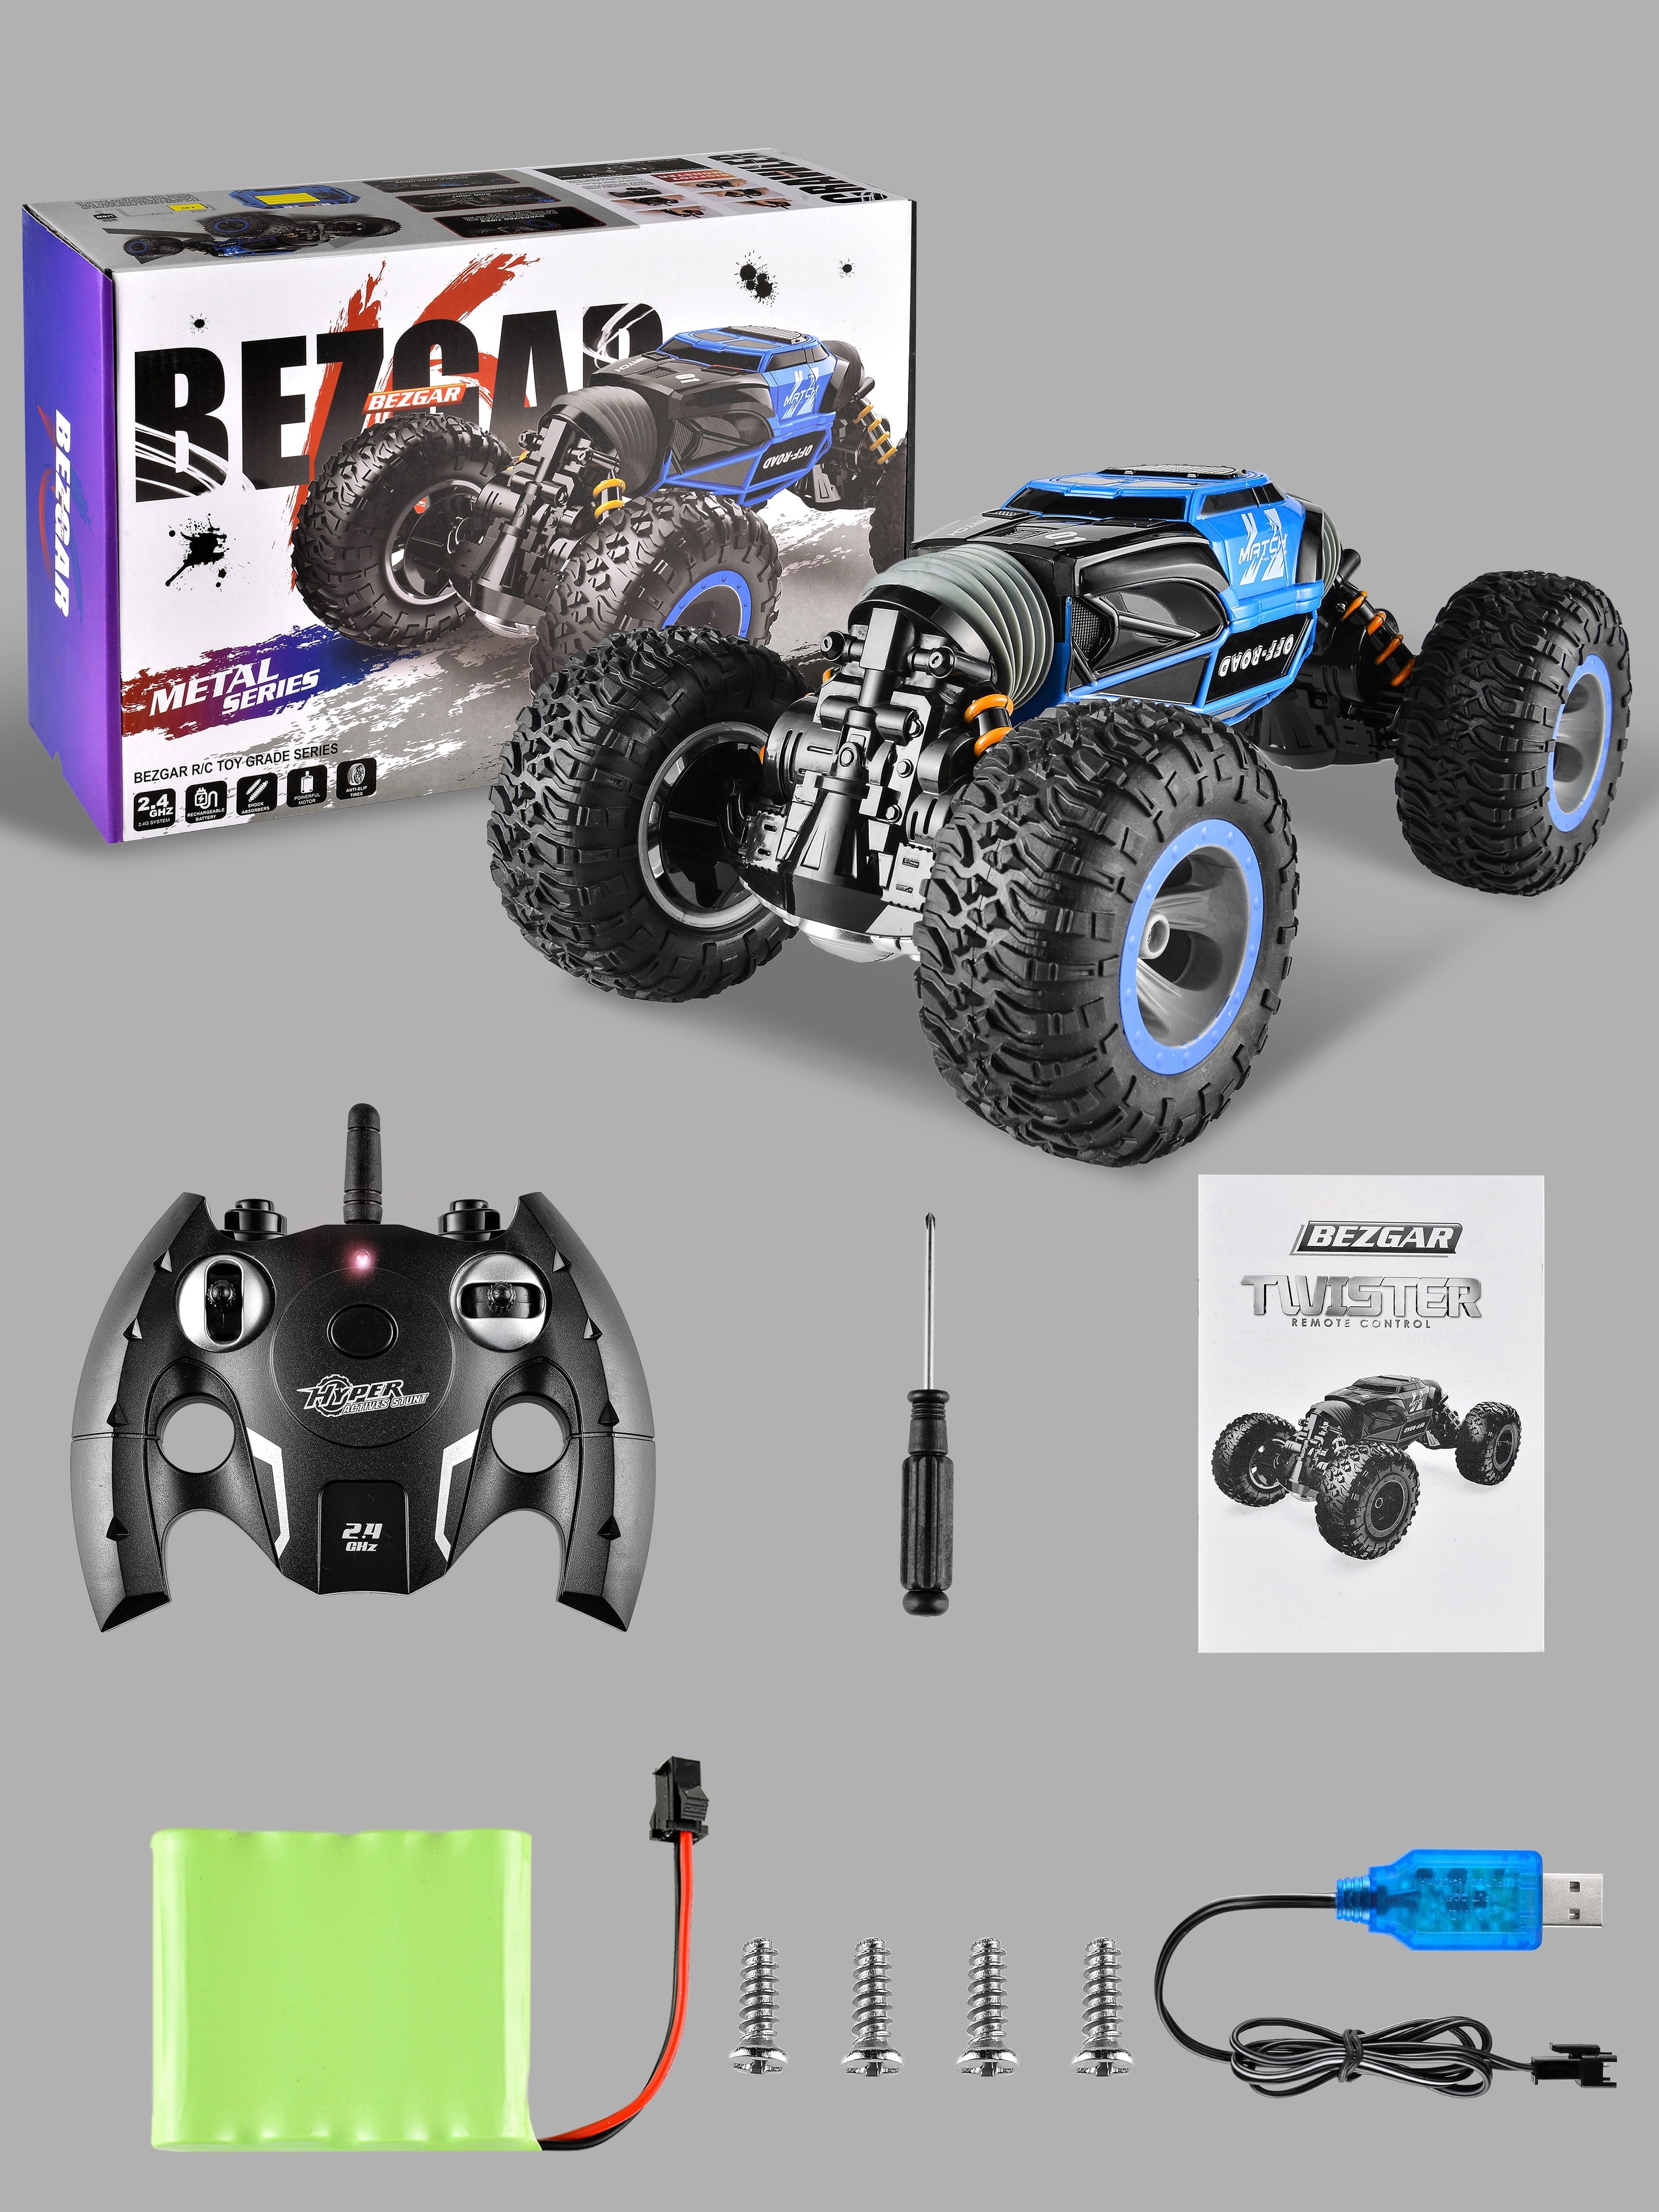 BEZGAR Remote Control Monster Truck Remote Control Cars, RC Truck Toy Car for Adults Boys Kids 6+, All Terrain Speed Transform Crawler RC Stunt Car